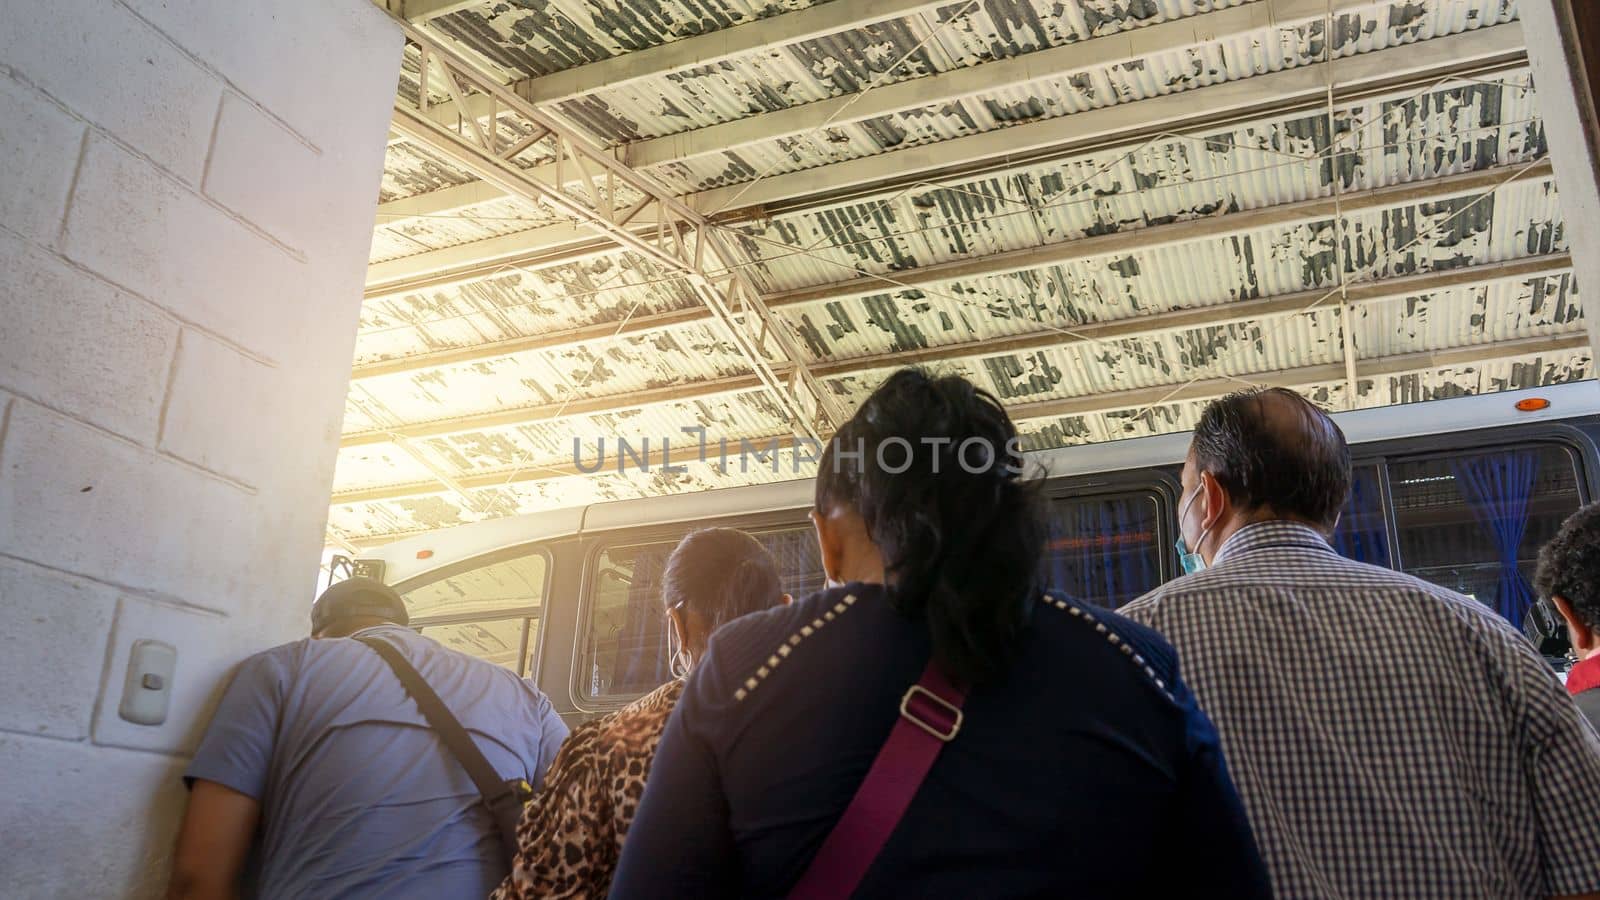 Latin American people waiting for the departure of a bus in a terminal by cfalvarez